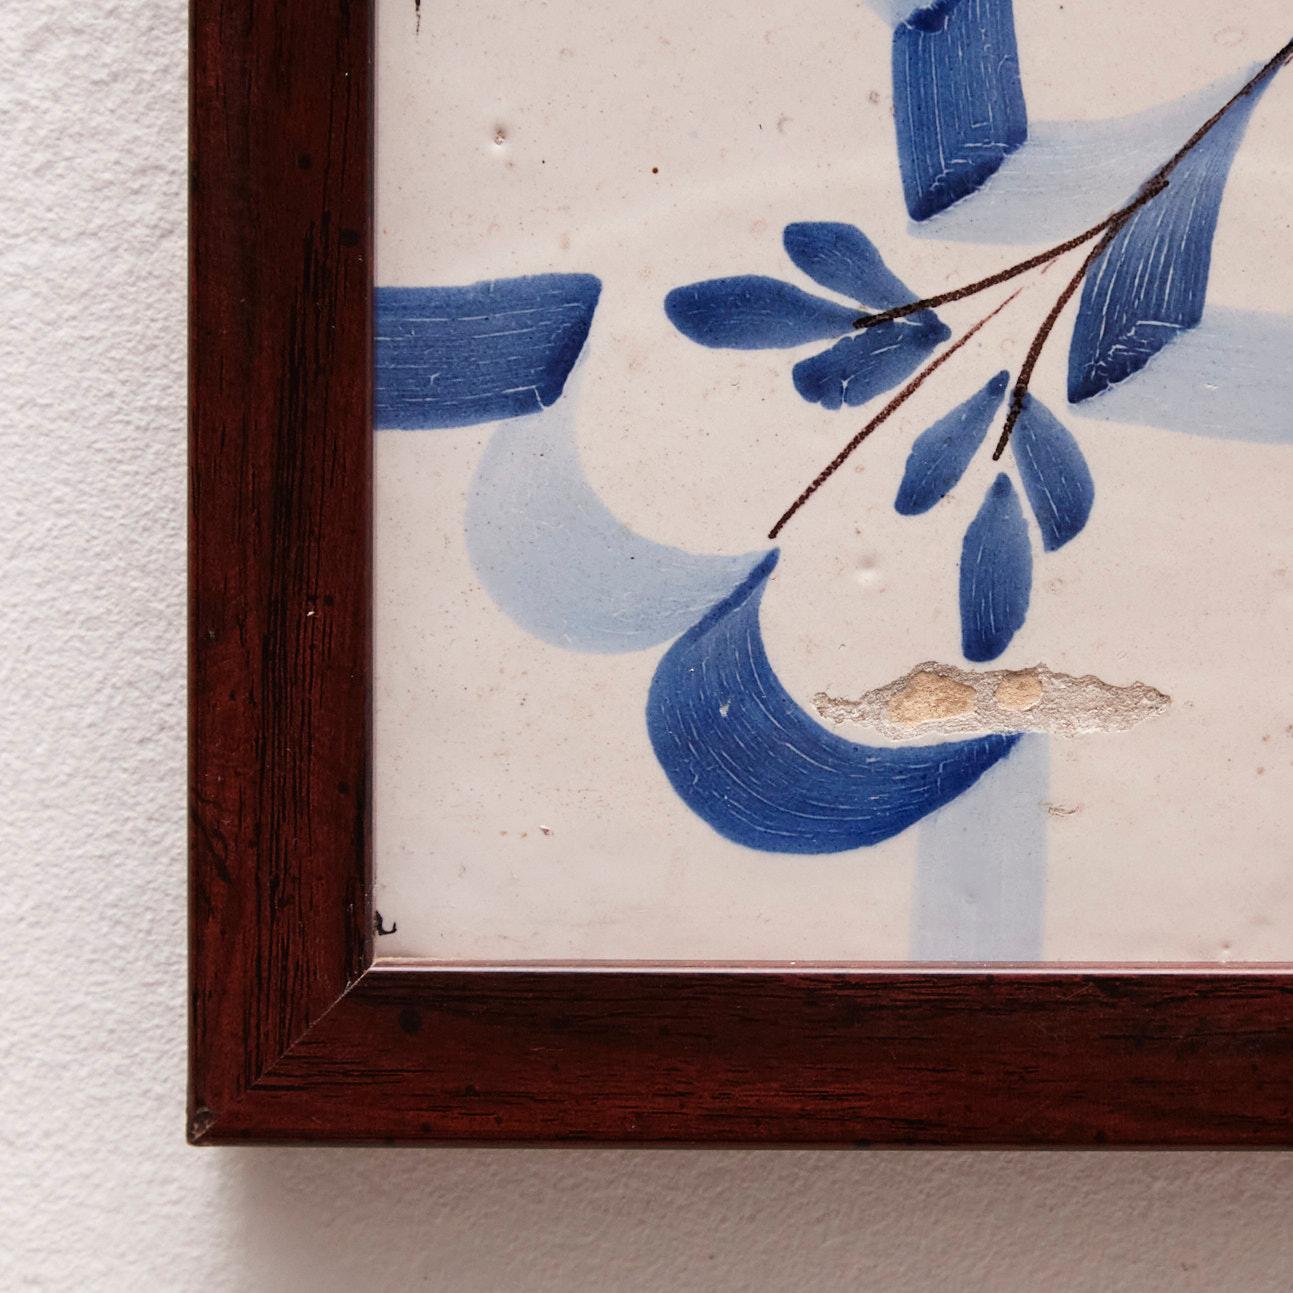 Spanish Framed Ceramic Tile Hand Painted Composition, circa 1950